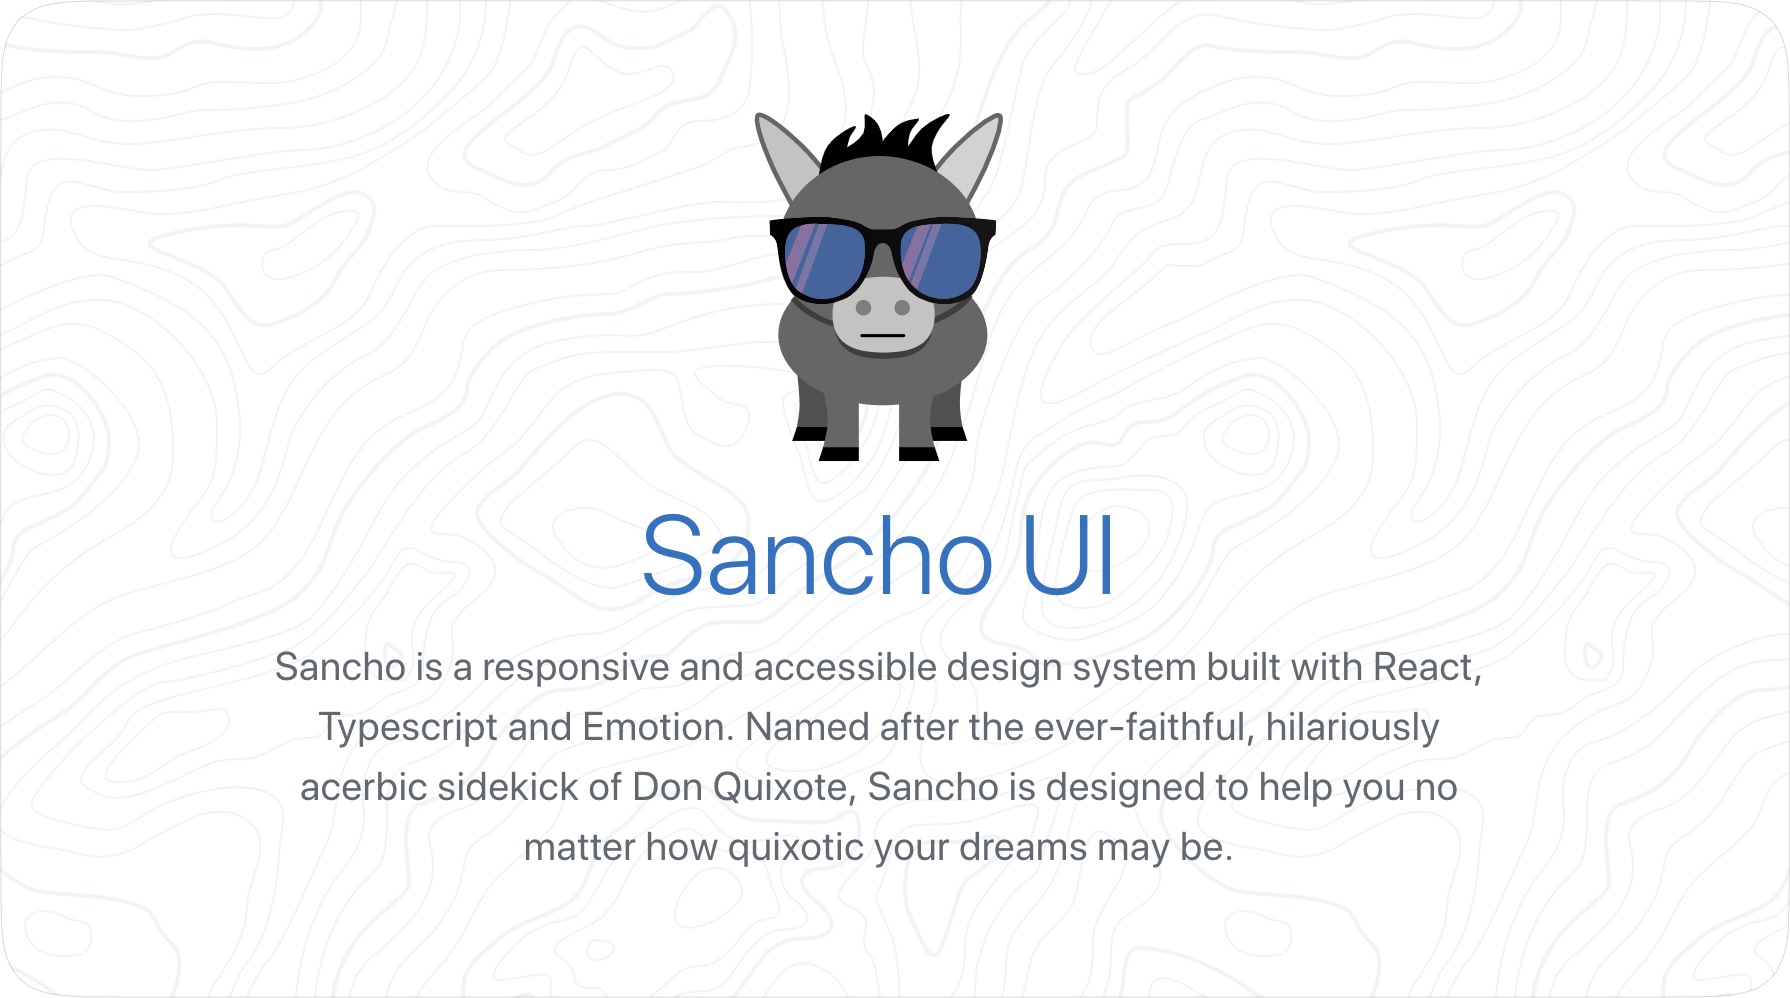 Sancho is a responsive and accessible design system built with React, Typescript and Emotion. Named after the ever-faithful, hilariously acerbic sidekick of Don Quixote, Sancho is designed to help you no matter how quixotic your dreams may be.